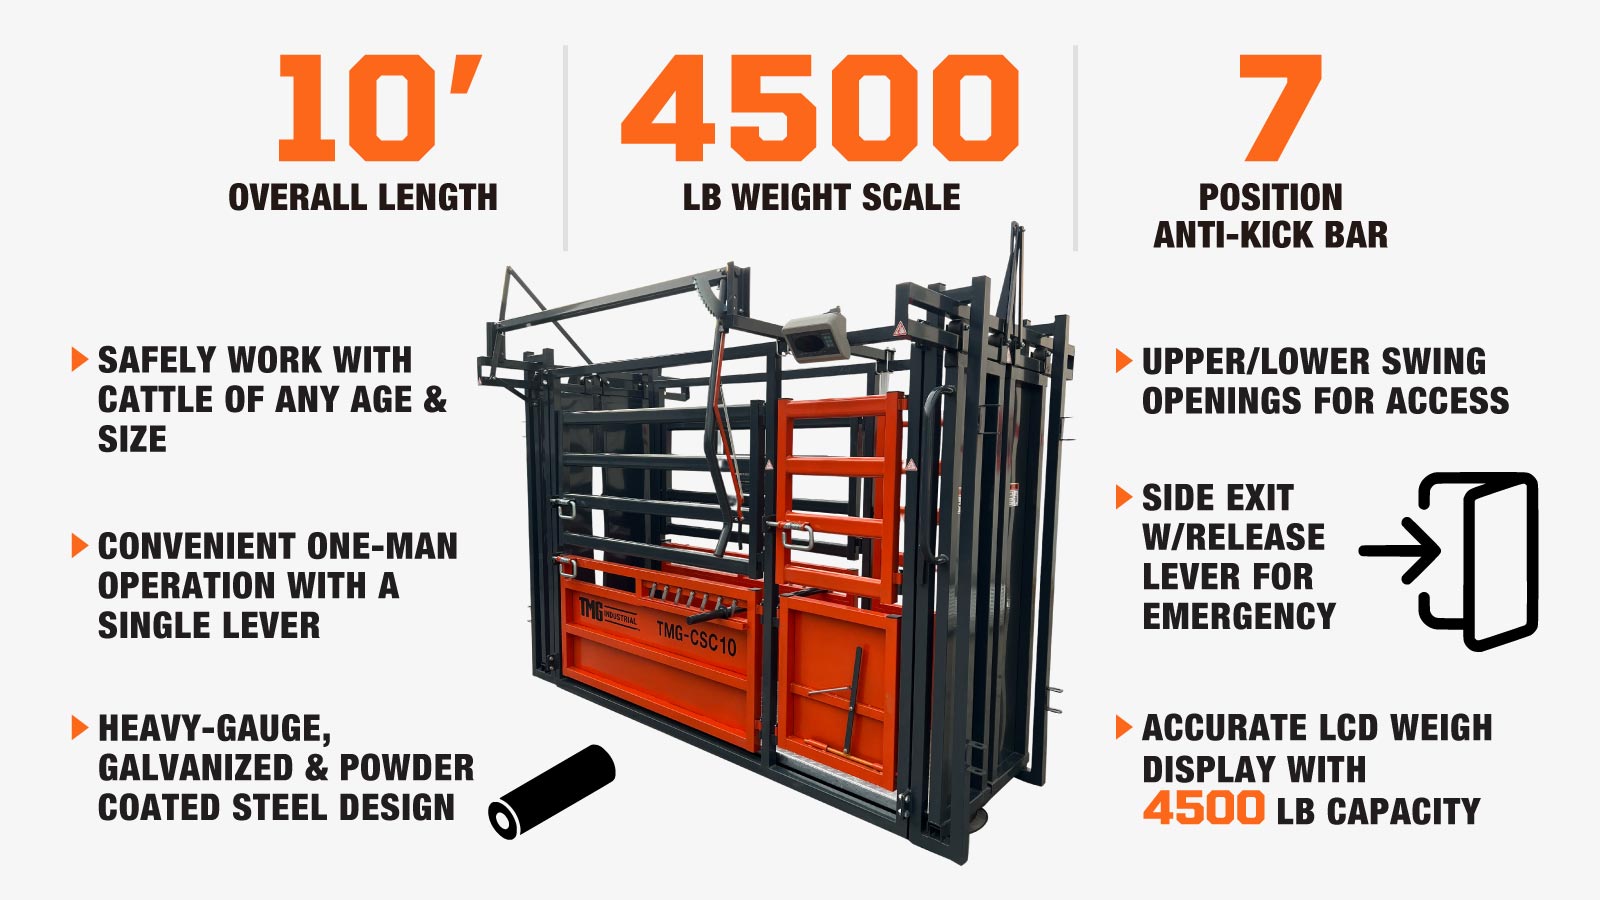 TMG Industrial 10’ Cattle Work Chute 4500-lb Weight Scale, Side Exit, Upper/Lower Swing Openings, LCD Weight Display, TMG-CSC10-description-image